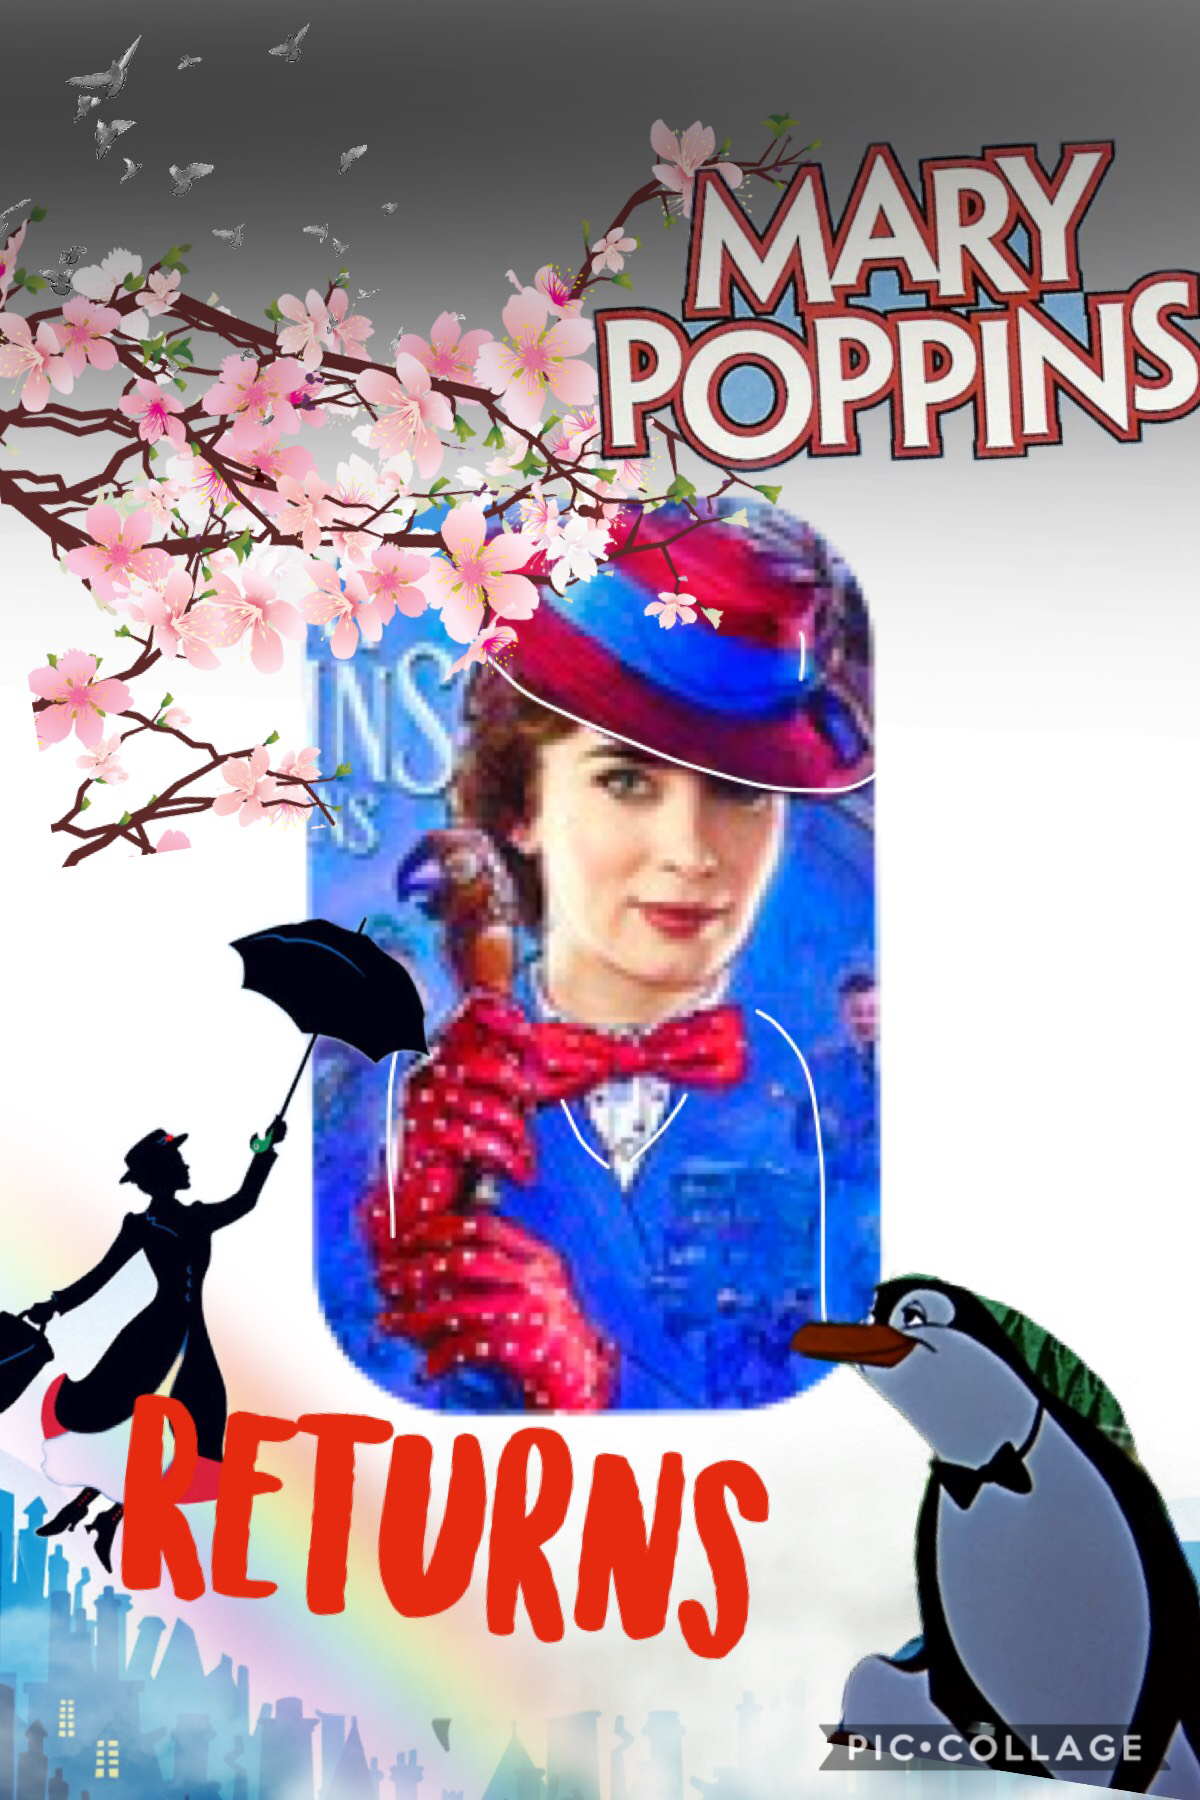 Have you seen Mary Poppins Returns?